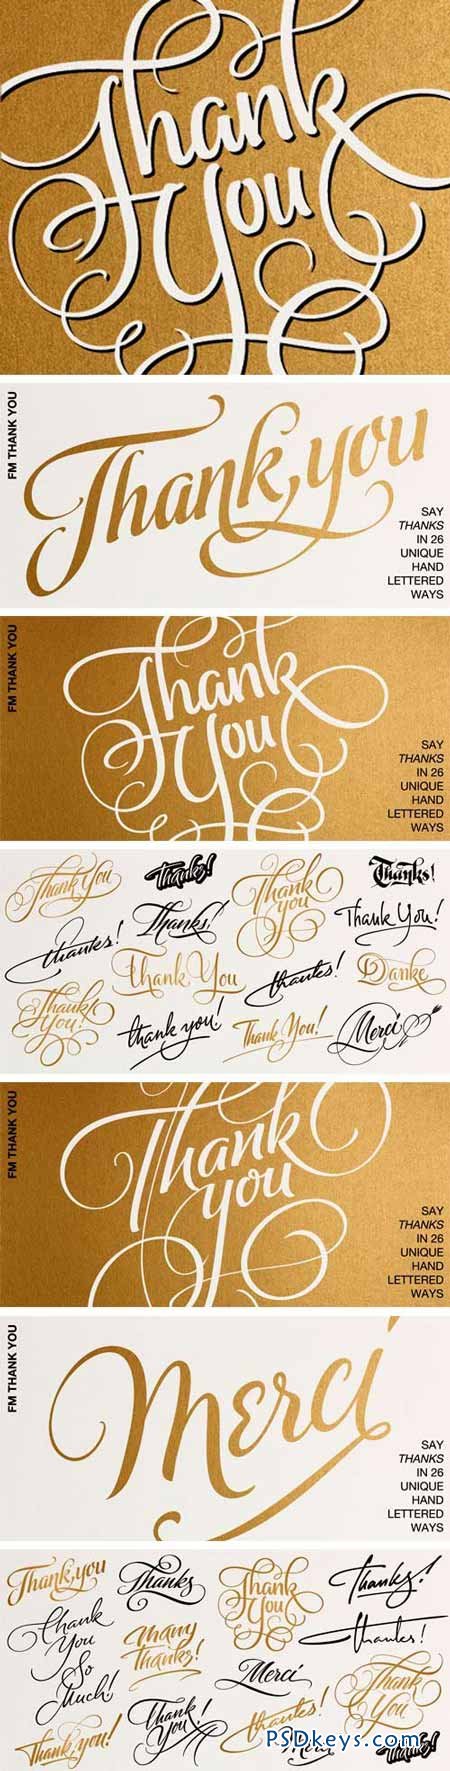 FM Thank You Font for $20